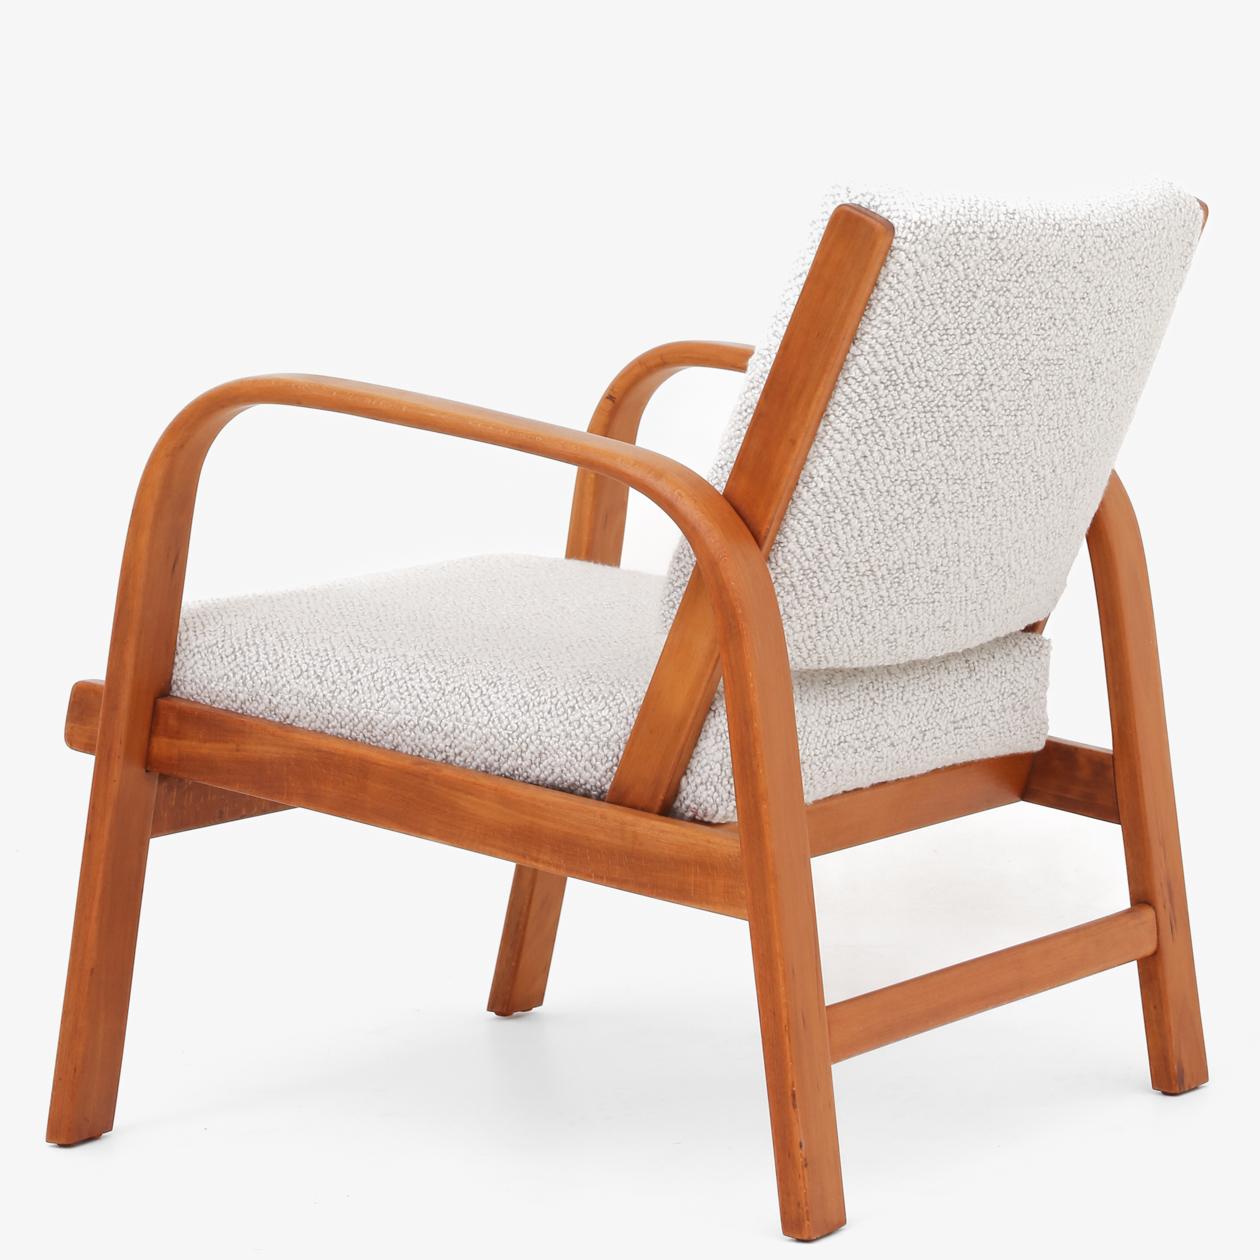 A set of easy chairs in patinated beech, reupholstered in textile (Bridget Meringue, colour 001). Designed in 1932. Magnus Stephensen / Fritz Hansen.